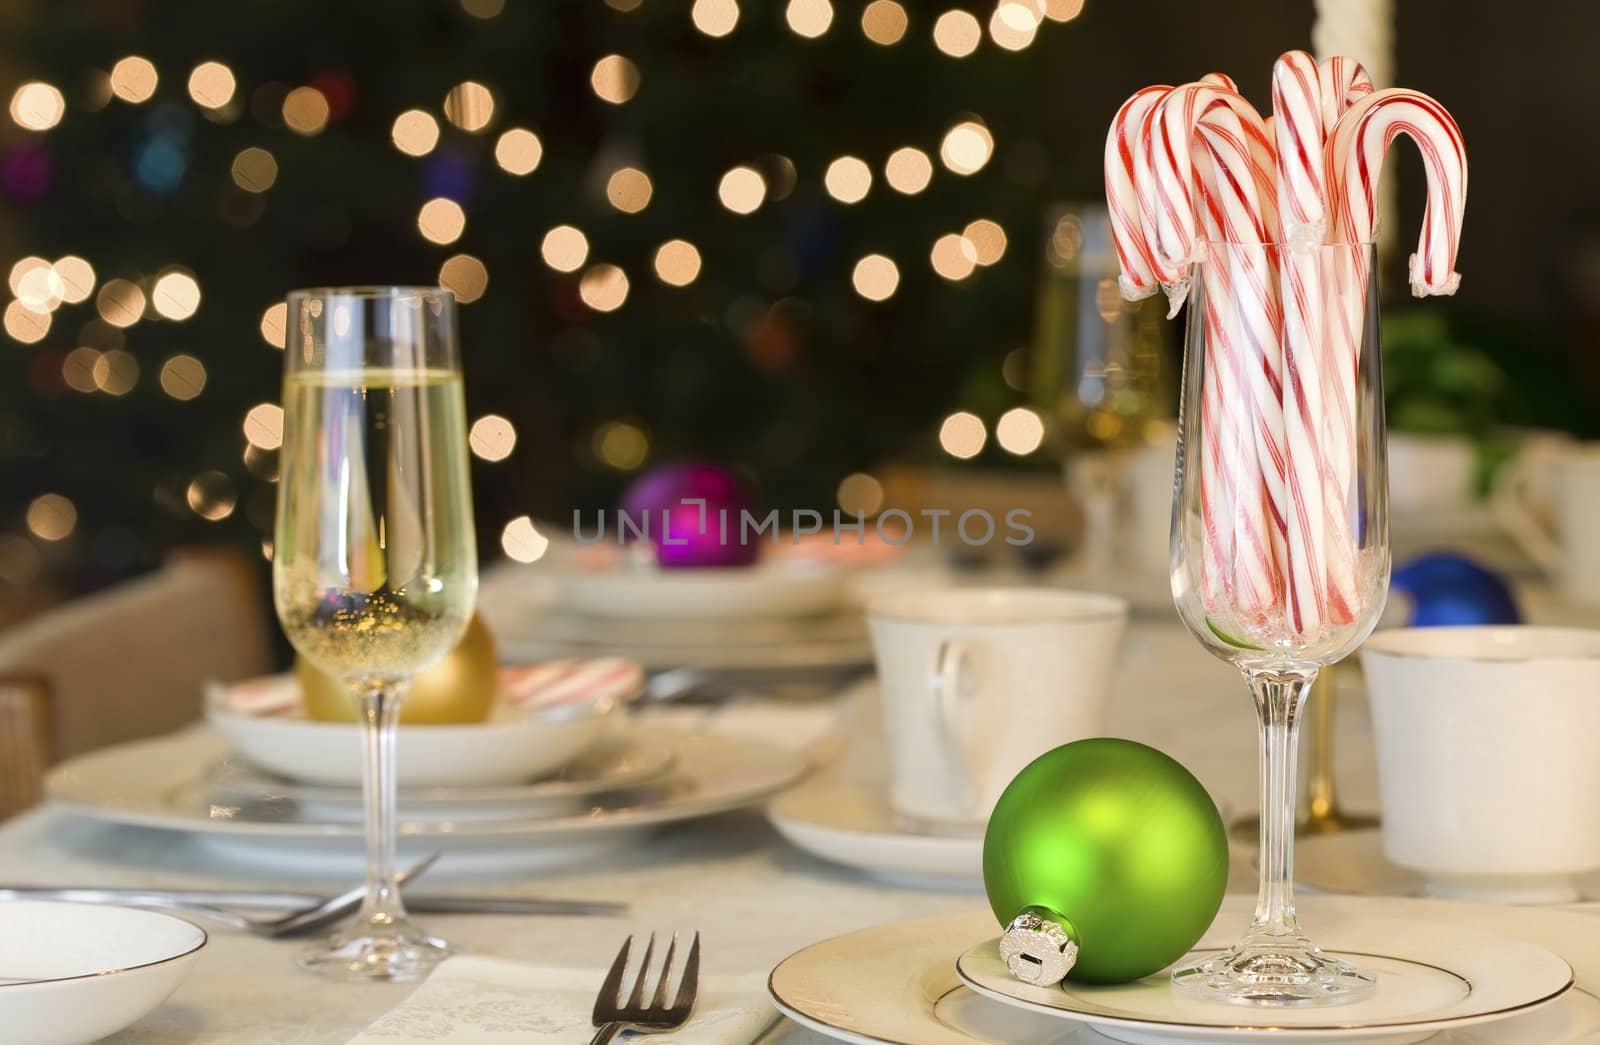 Candy canes and Christmas ornaments on dining table by jarenwicklund